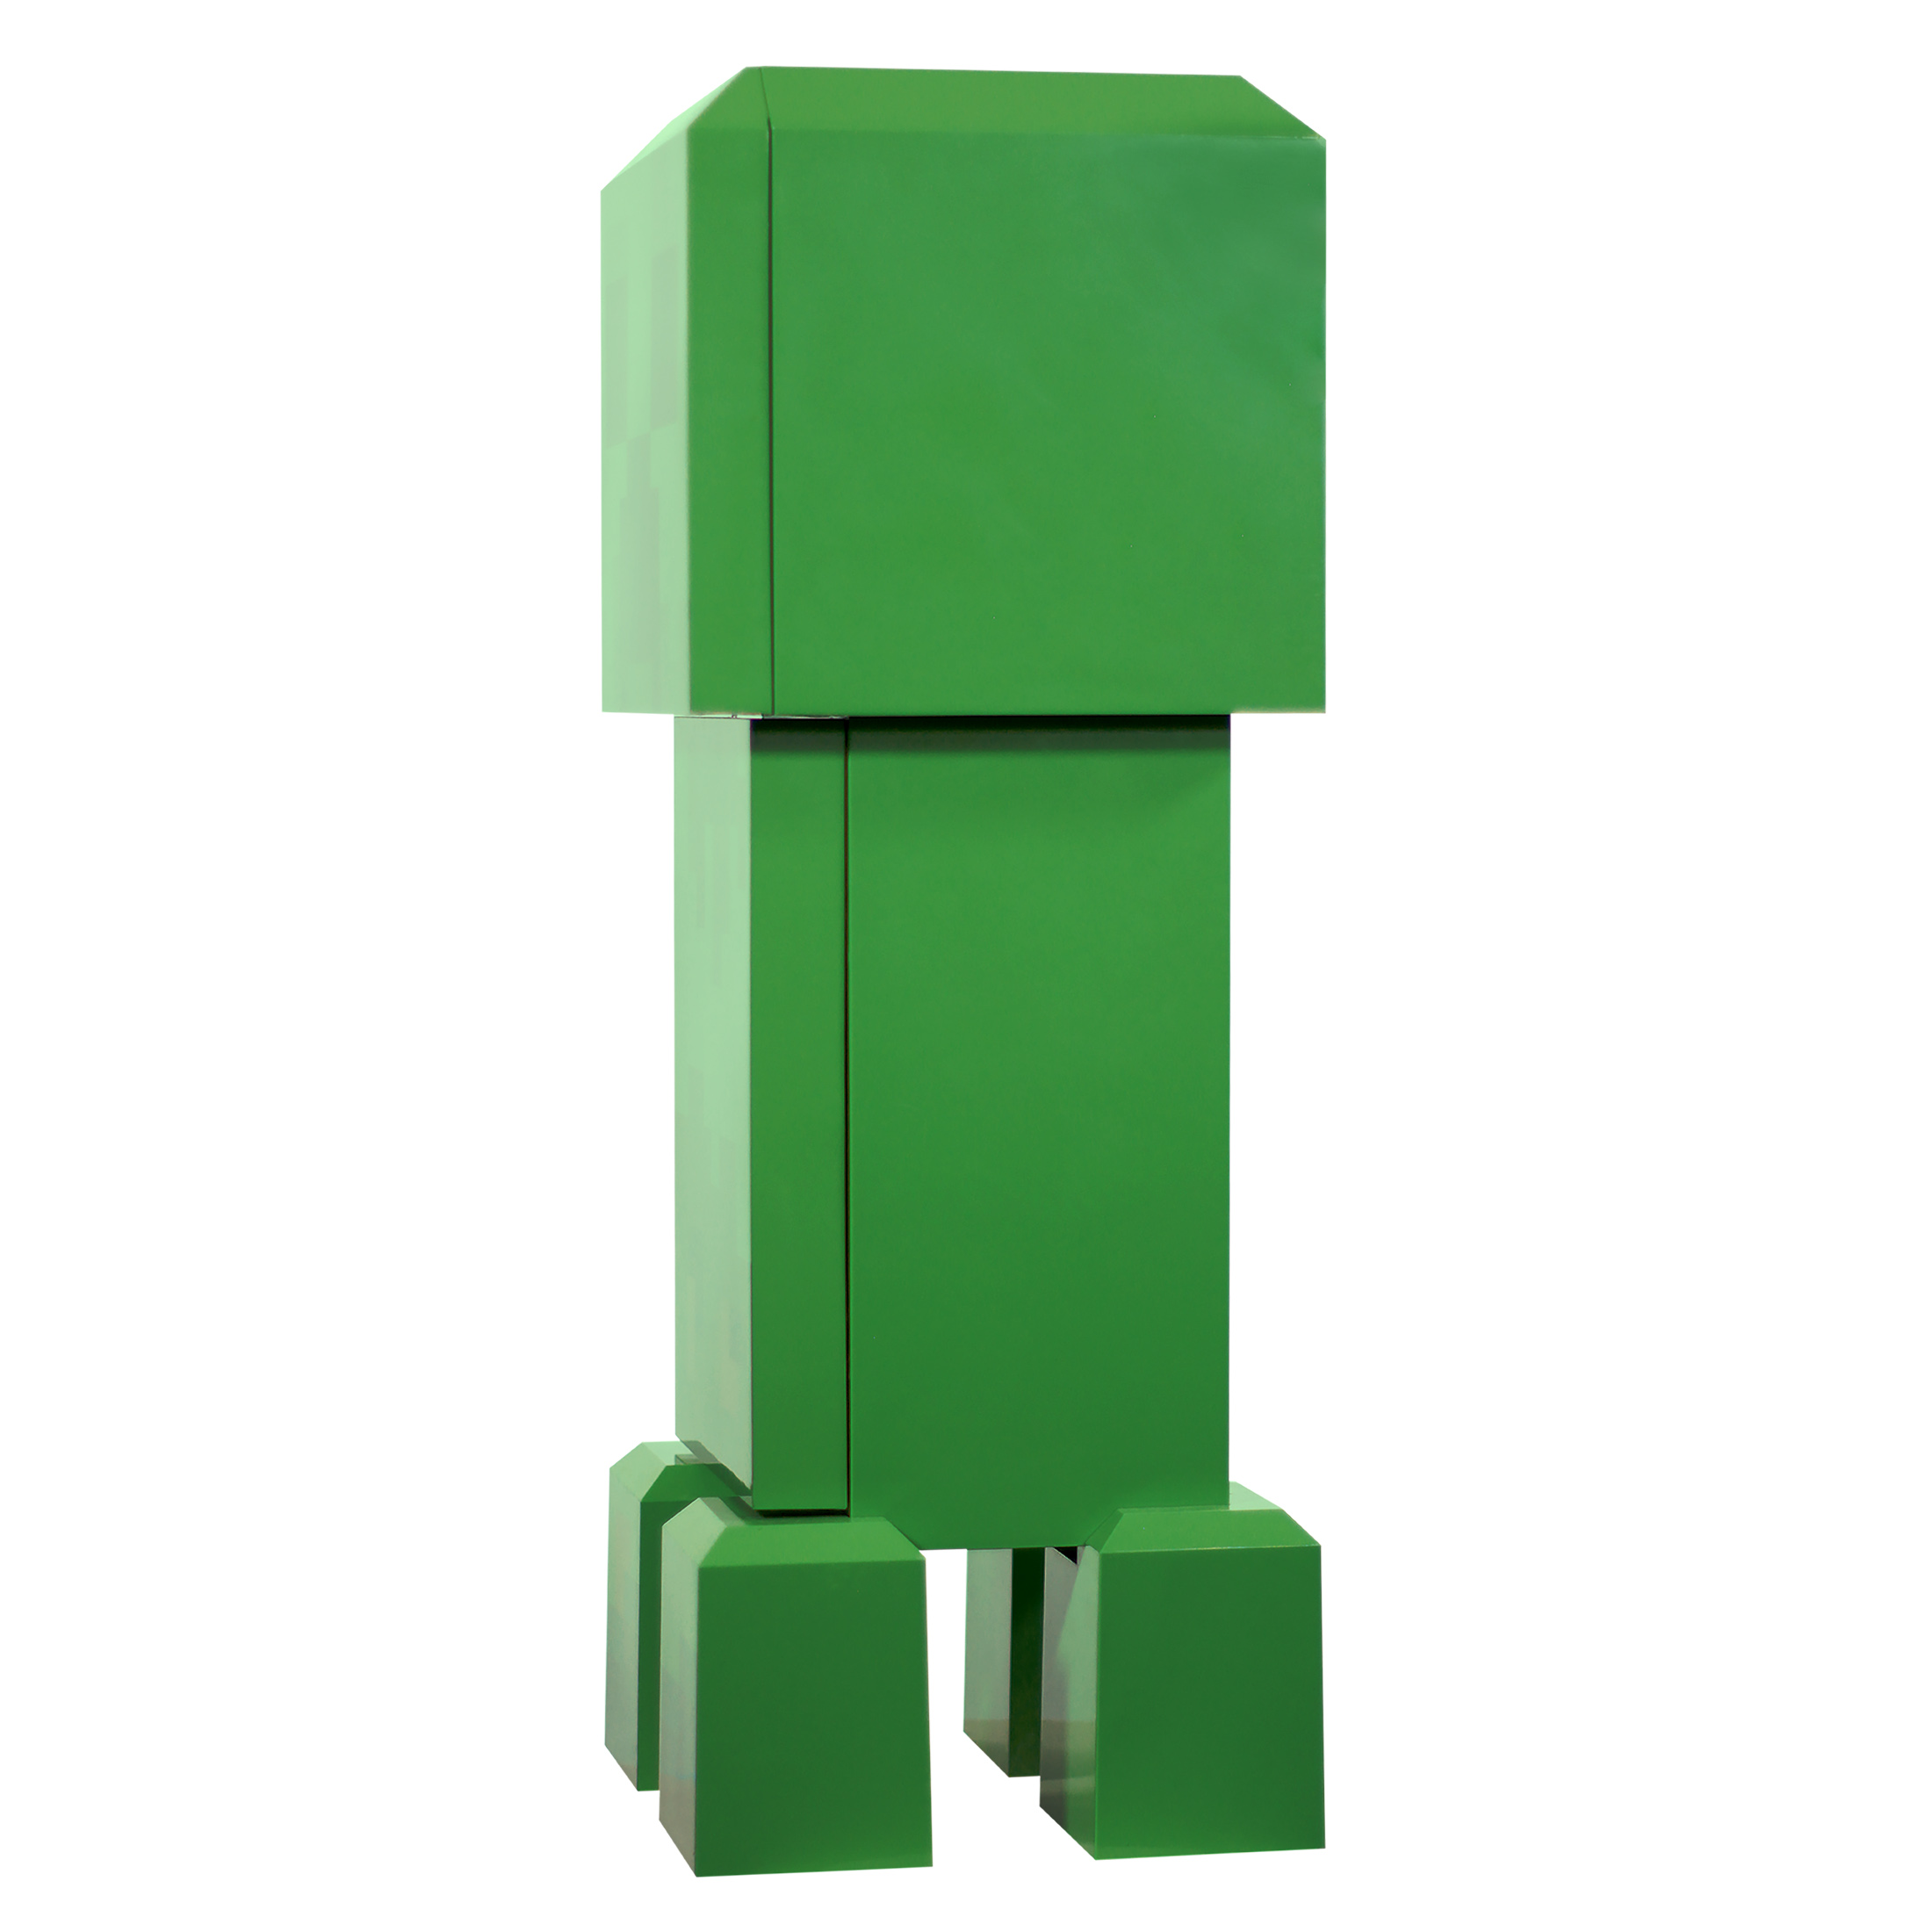  Minecraft Creeper Light with Official Creeper Sounds, Handheld  Night Light & Fun Minecraft Toy for Kids, Minecraft Room Decor : Home &  Kitchen